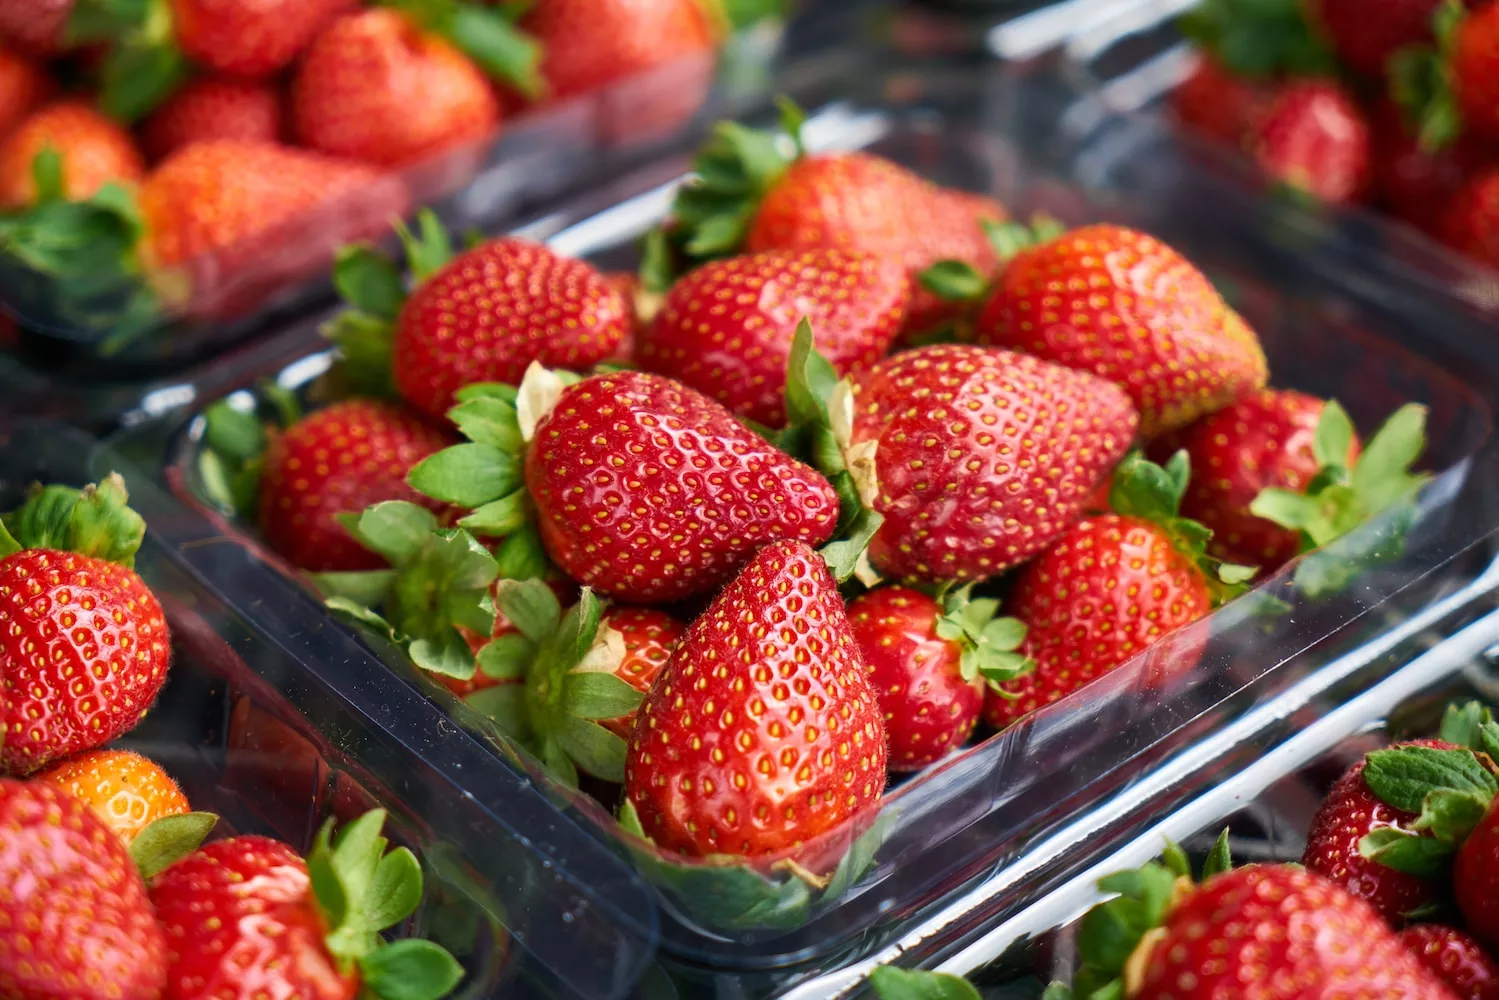 strawberries on clear plastic container, strawberries health benefits